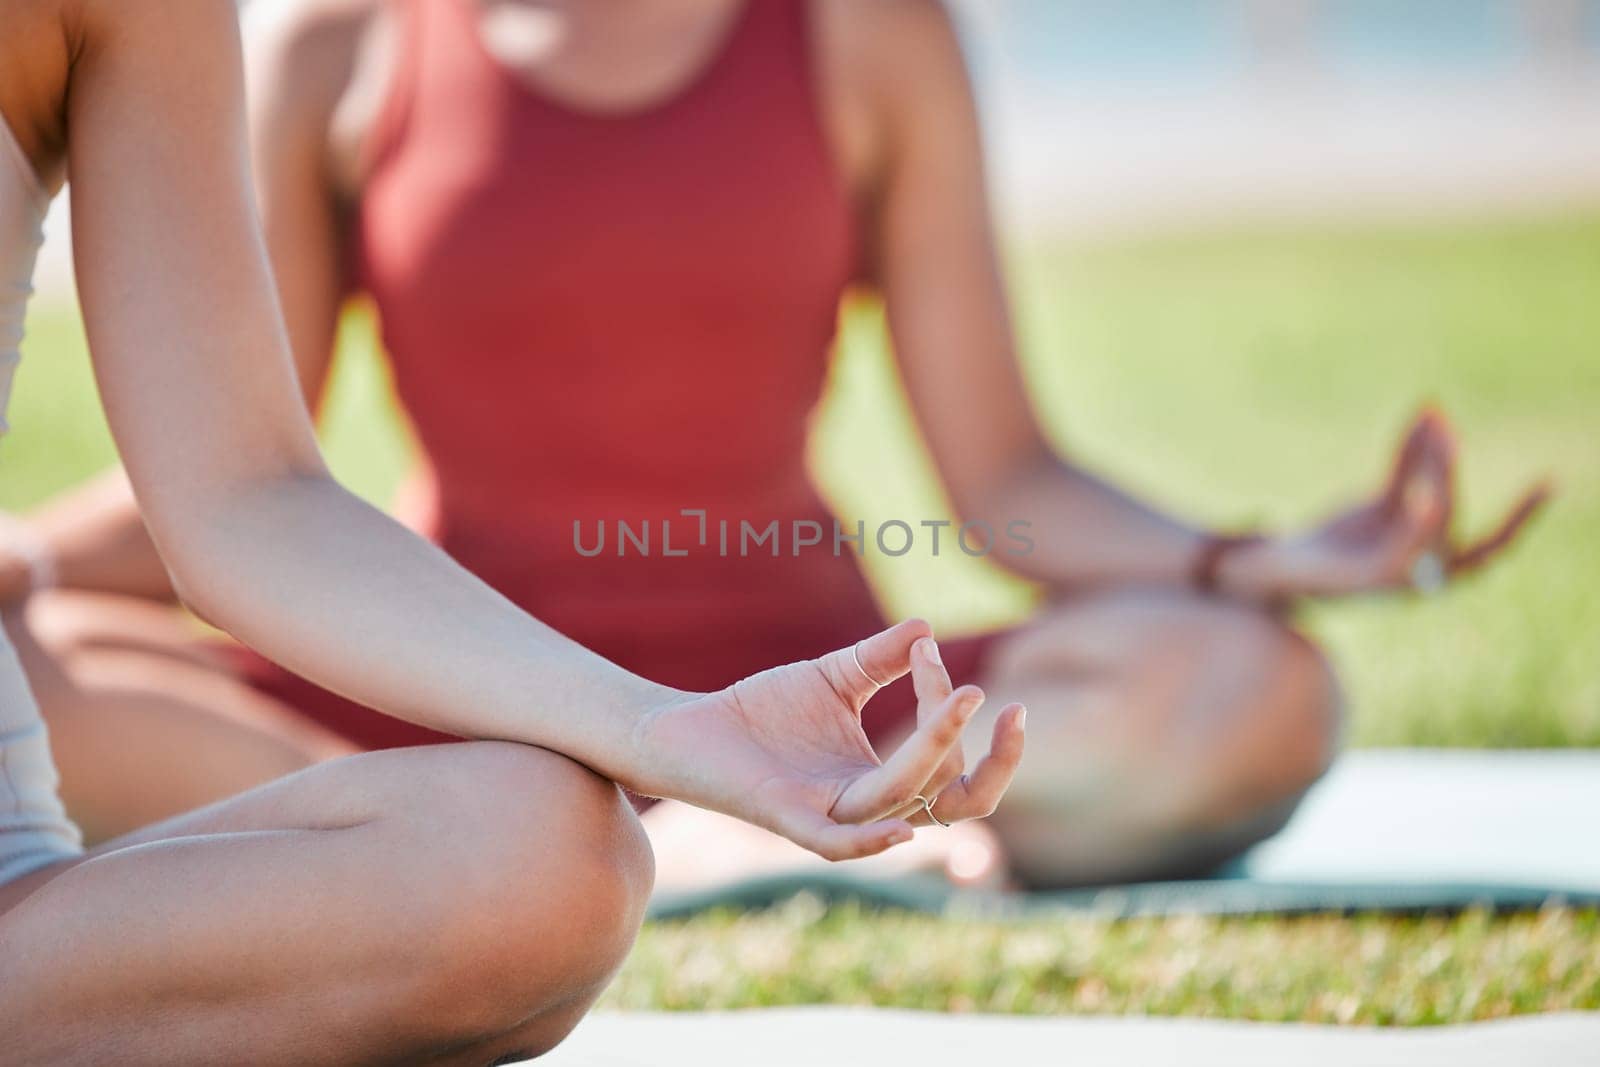 Yoga class, lotus hands and women for zen fitness, exercise and mindfulness, healing and peace in park grass. Meditation, nature and calm people, personal trainer for mental health and body wellness.